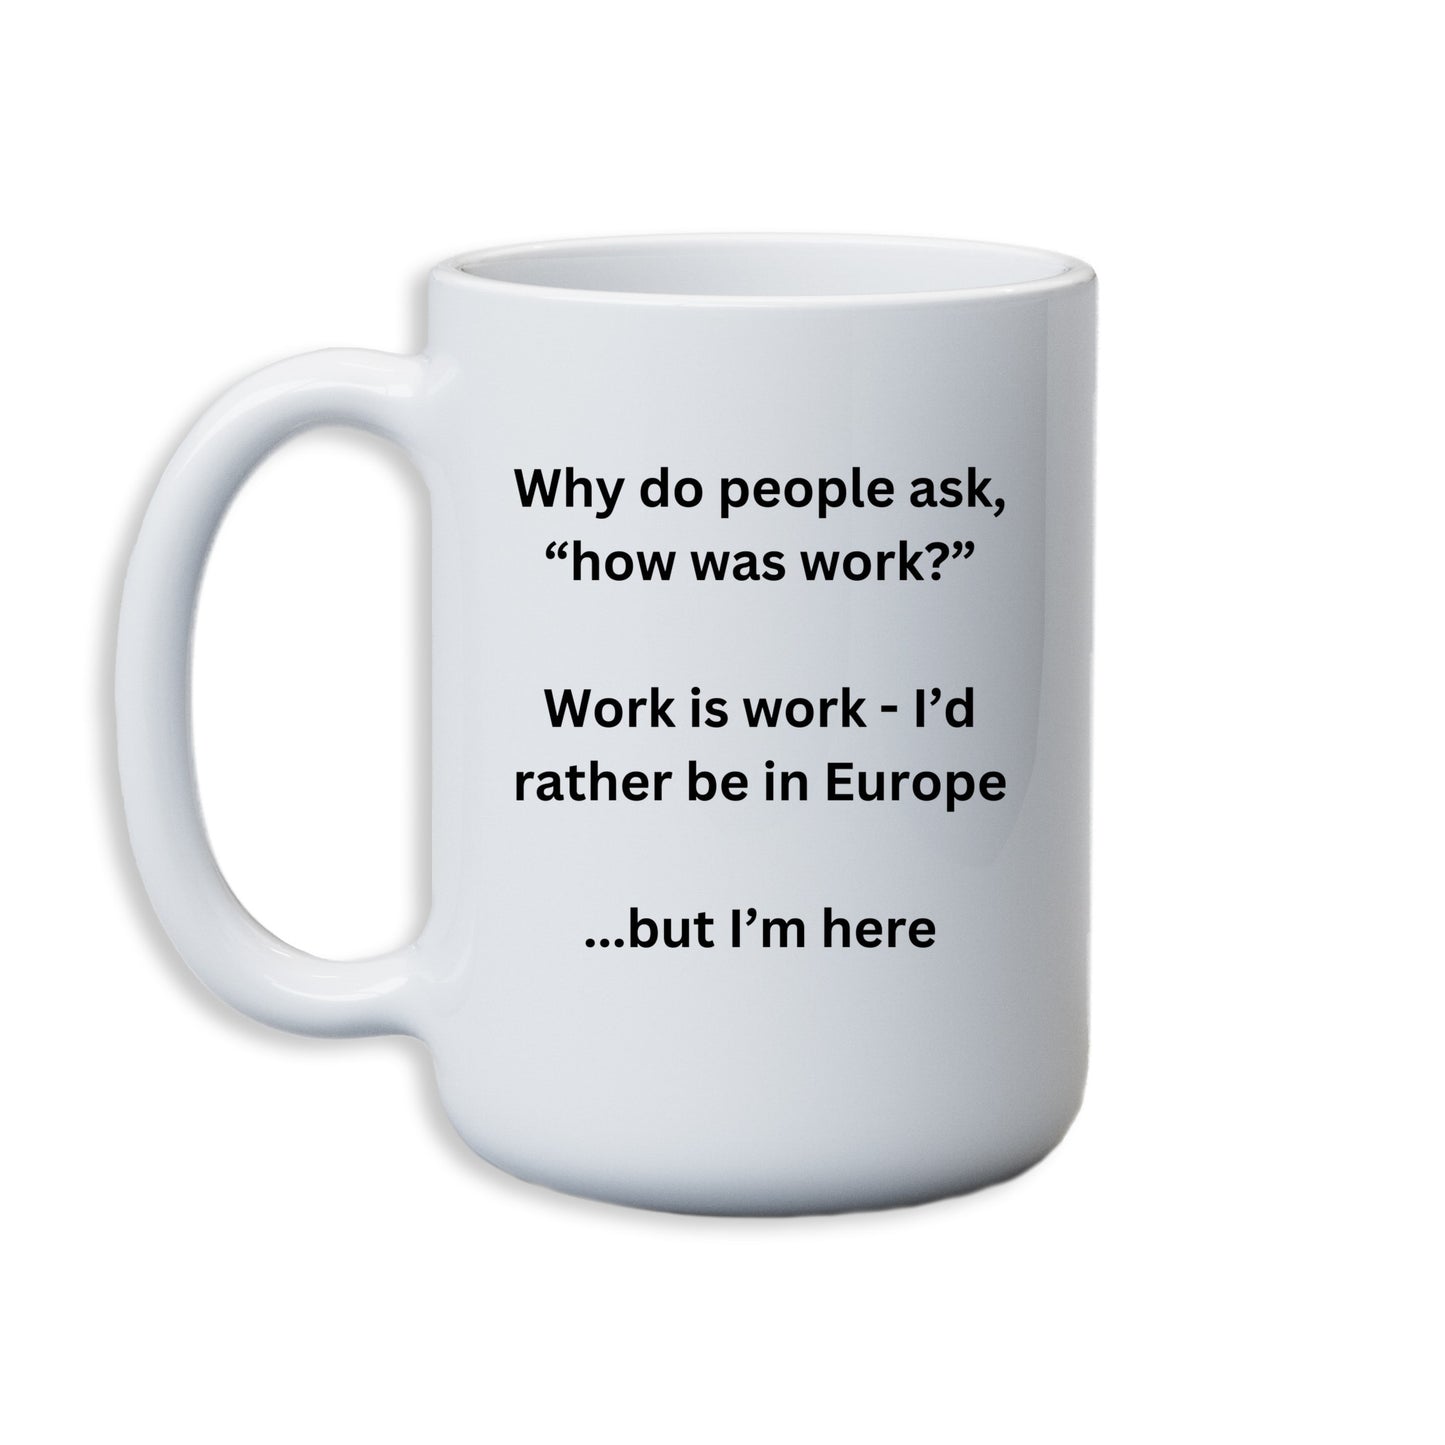 Why do people as "how is work" I'd rather be in Europe... Mug 11 Oz